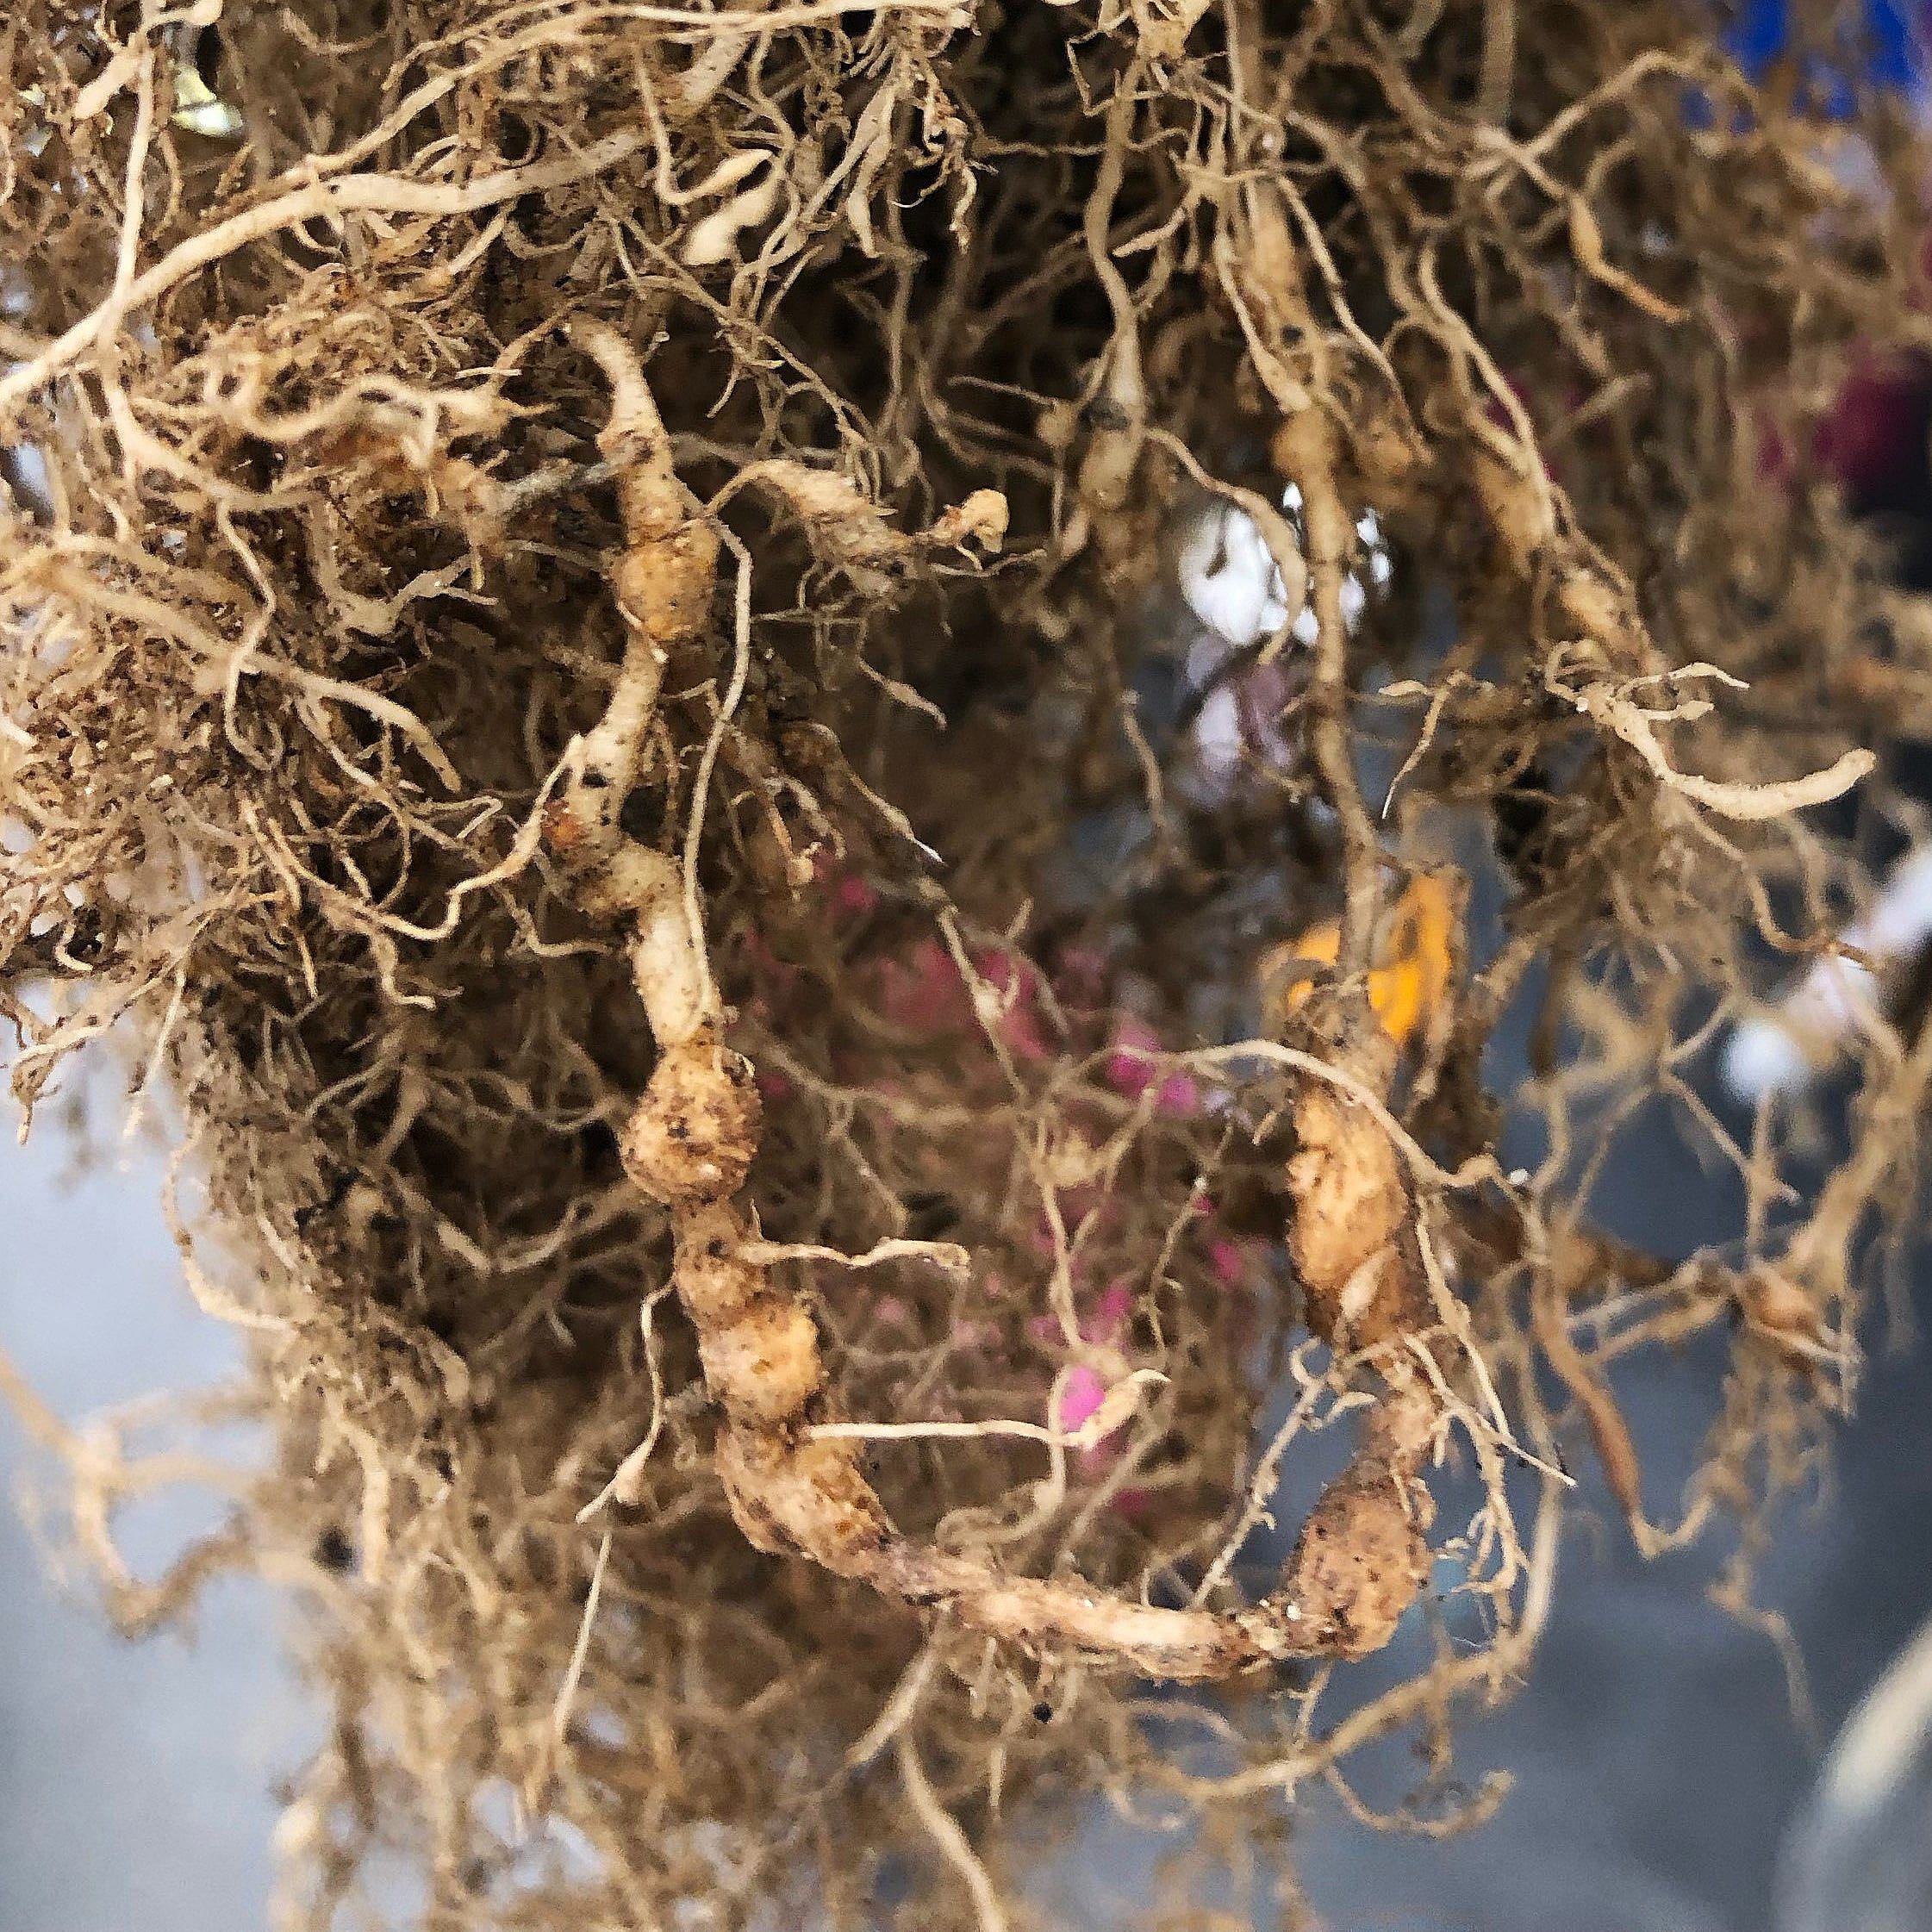 These tomato roots have been infected with southern root-knot nematodes (Meloidogyne incognita). The microscopic roundworms form galls or “knots” where they feed, ultimately stunting the plants and reducing yield. Image credit: BTI/Murli Manohar